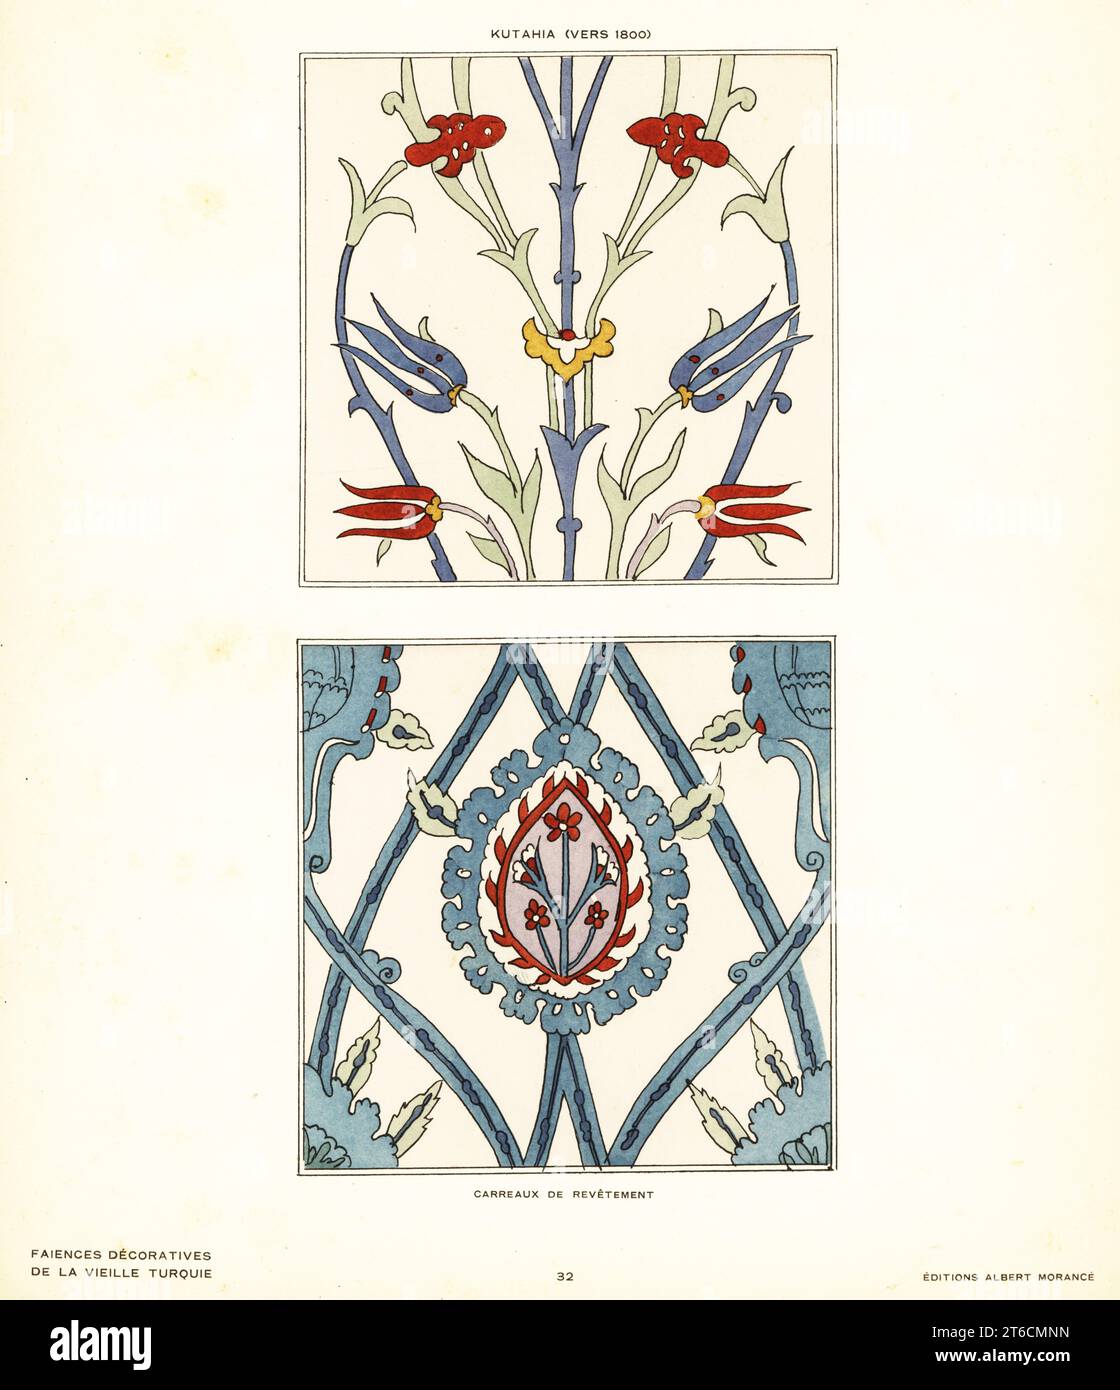 Ceramic floor tiles decorated with flowers and foliage made in Kutahya, Turkey, circa 1800. Carreaux de revetement. Kutahia (vers 1800). Pochoir (stencil) handcoloured lithograph from Alexandre Raymonds Faience Decorative de la Vieille Turquie, Decorative Pottery from Ancient Turkey, Editions Albert Morance, Paris, 1927. Stock Photo